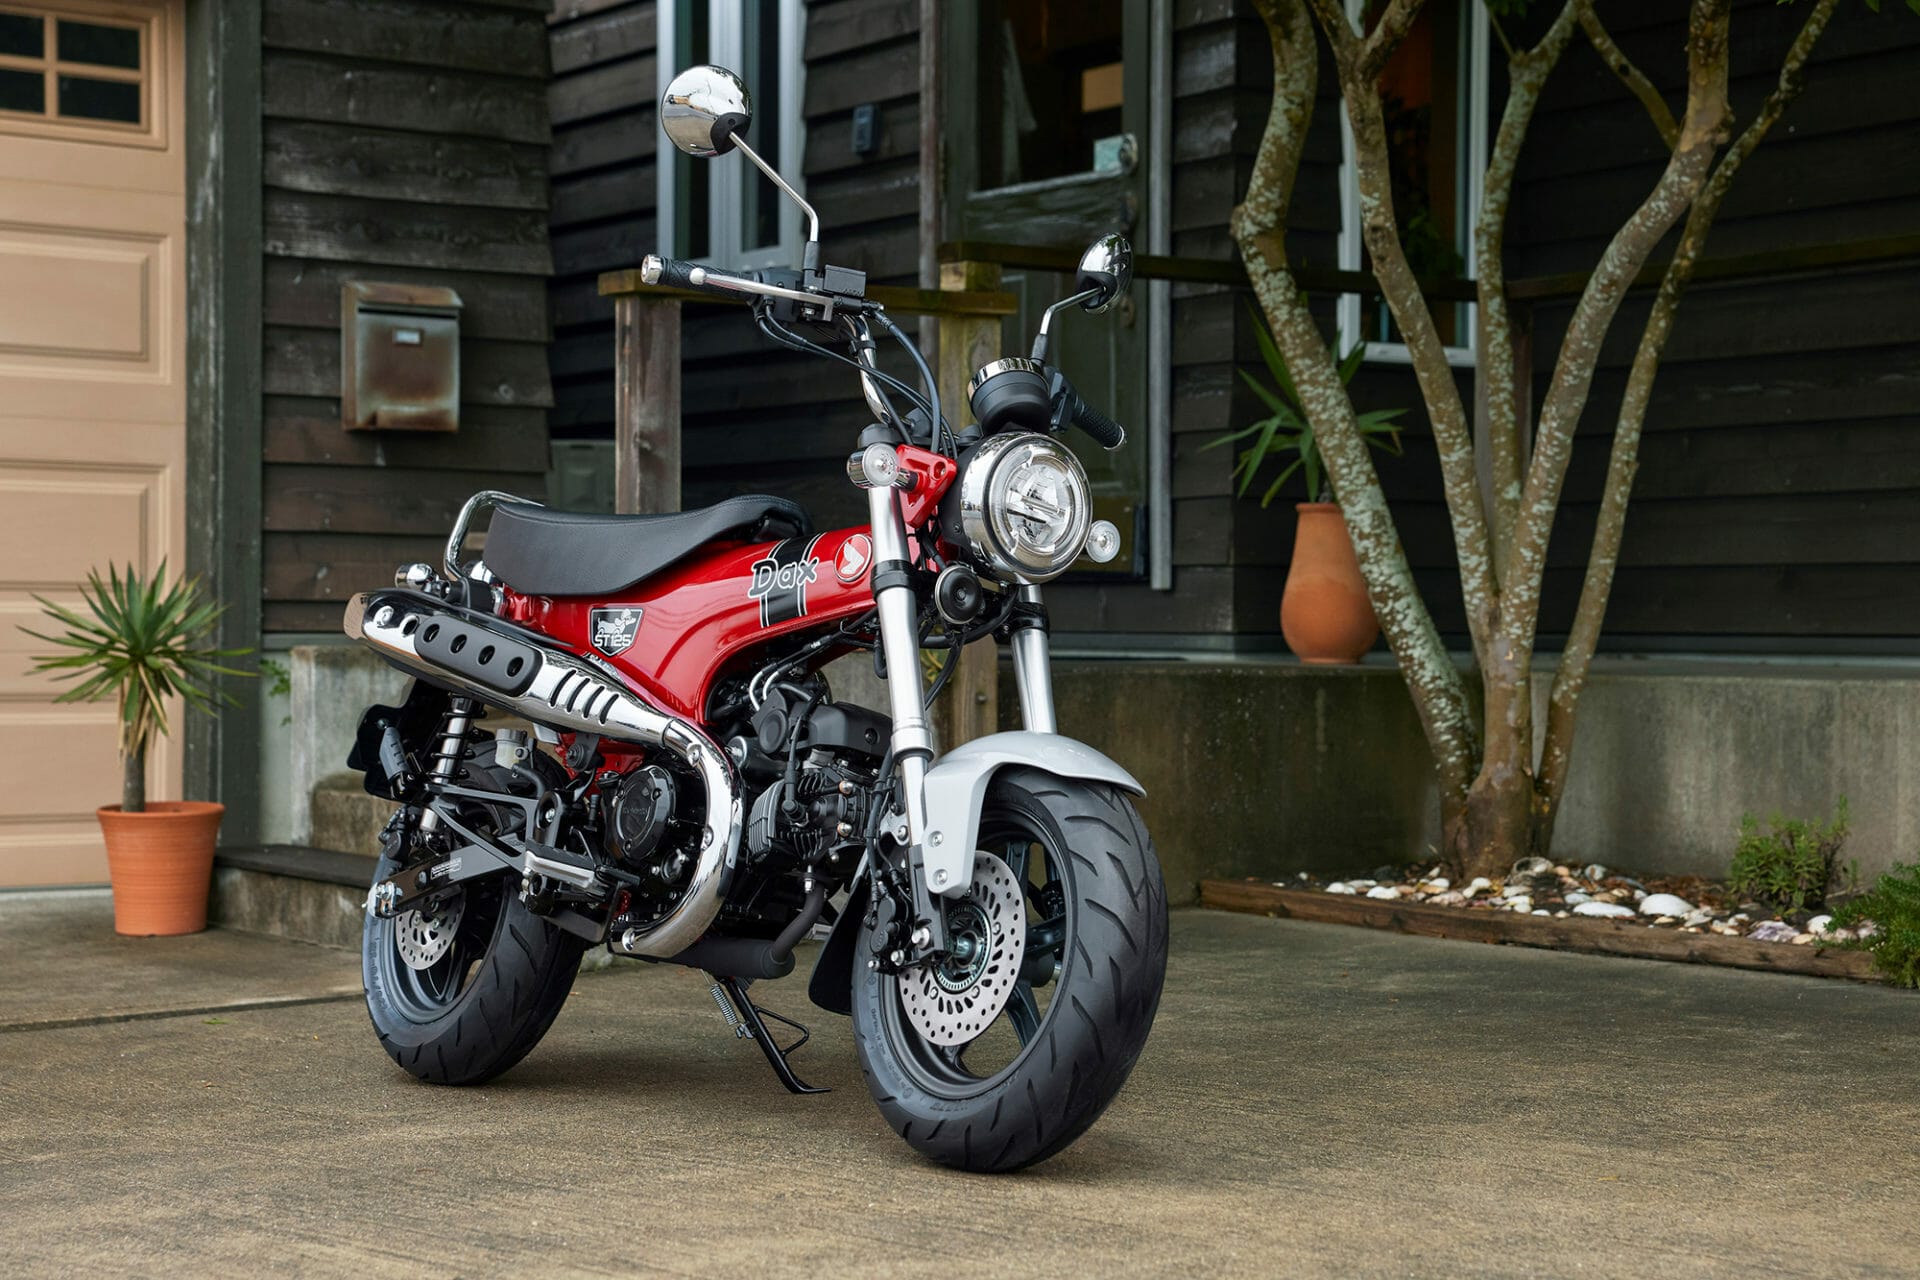 Return of the Honda Dax - after 41 years
- also in the MOTORCYCLES.NEWS APP